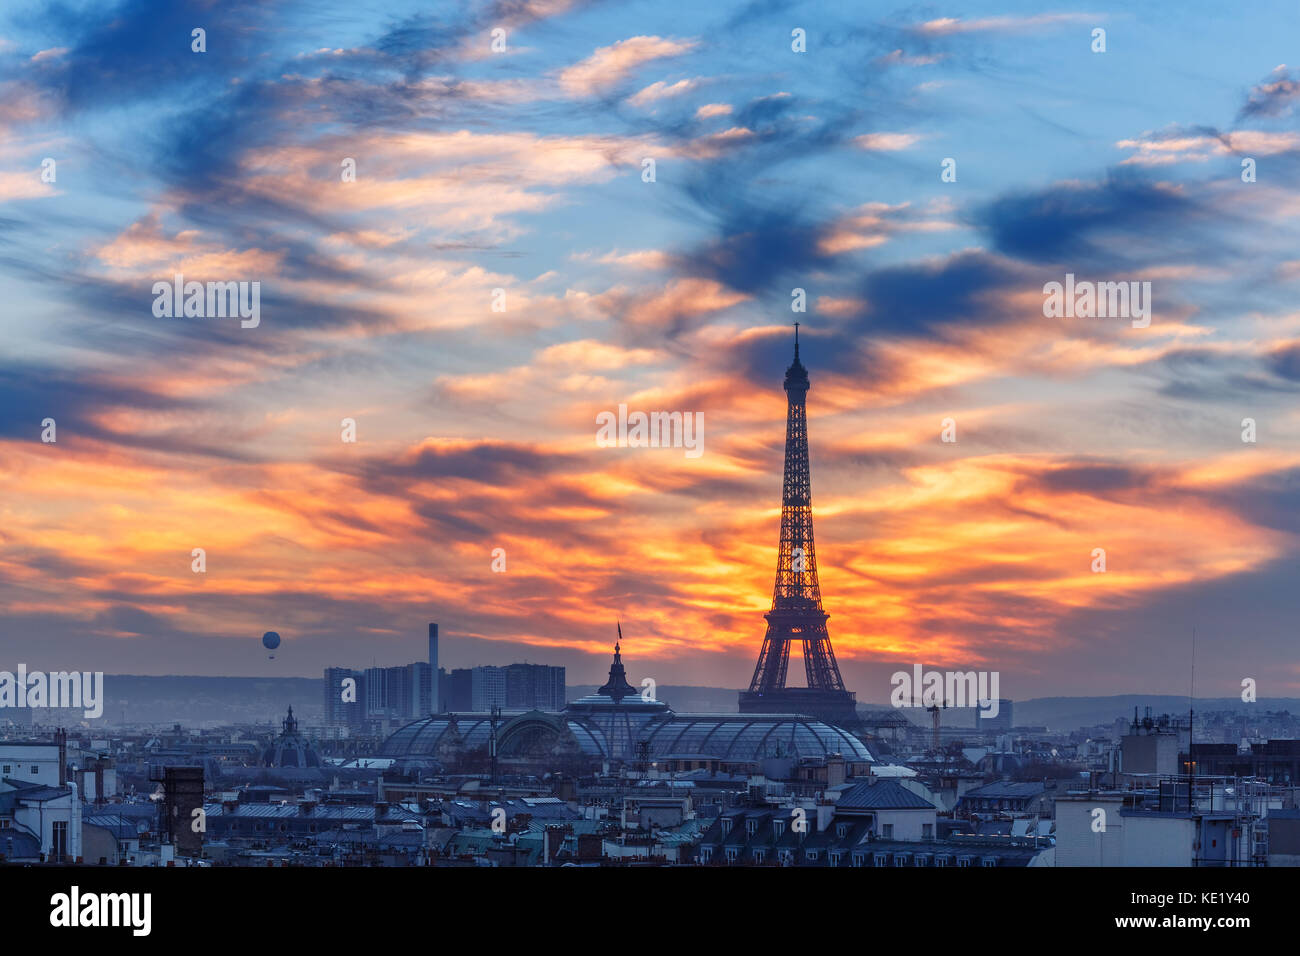 Eiffel Tower at sunset in Paris, France Stock Photo